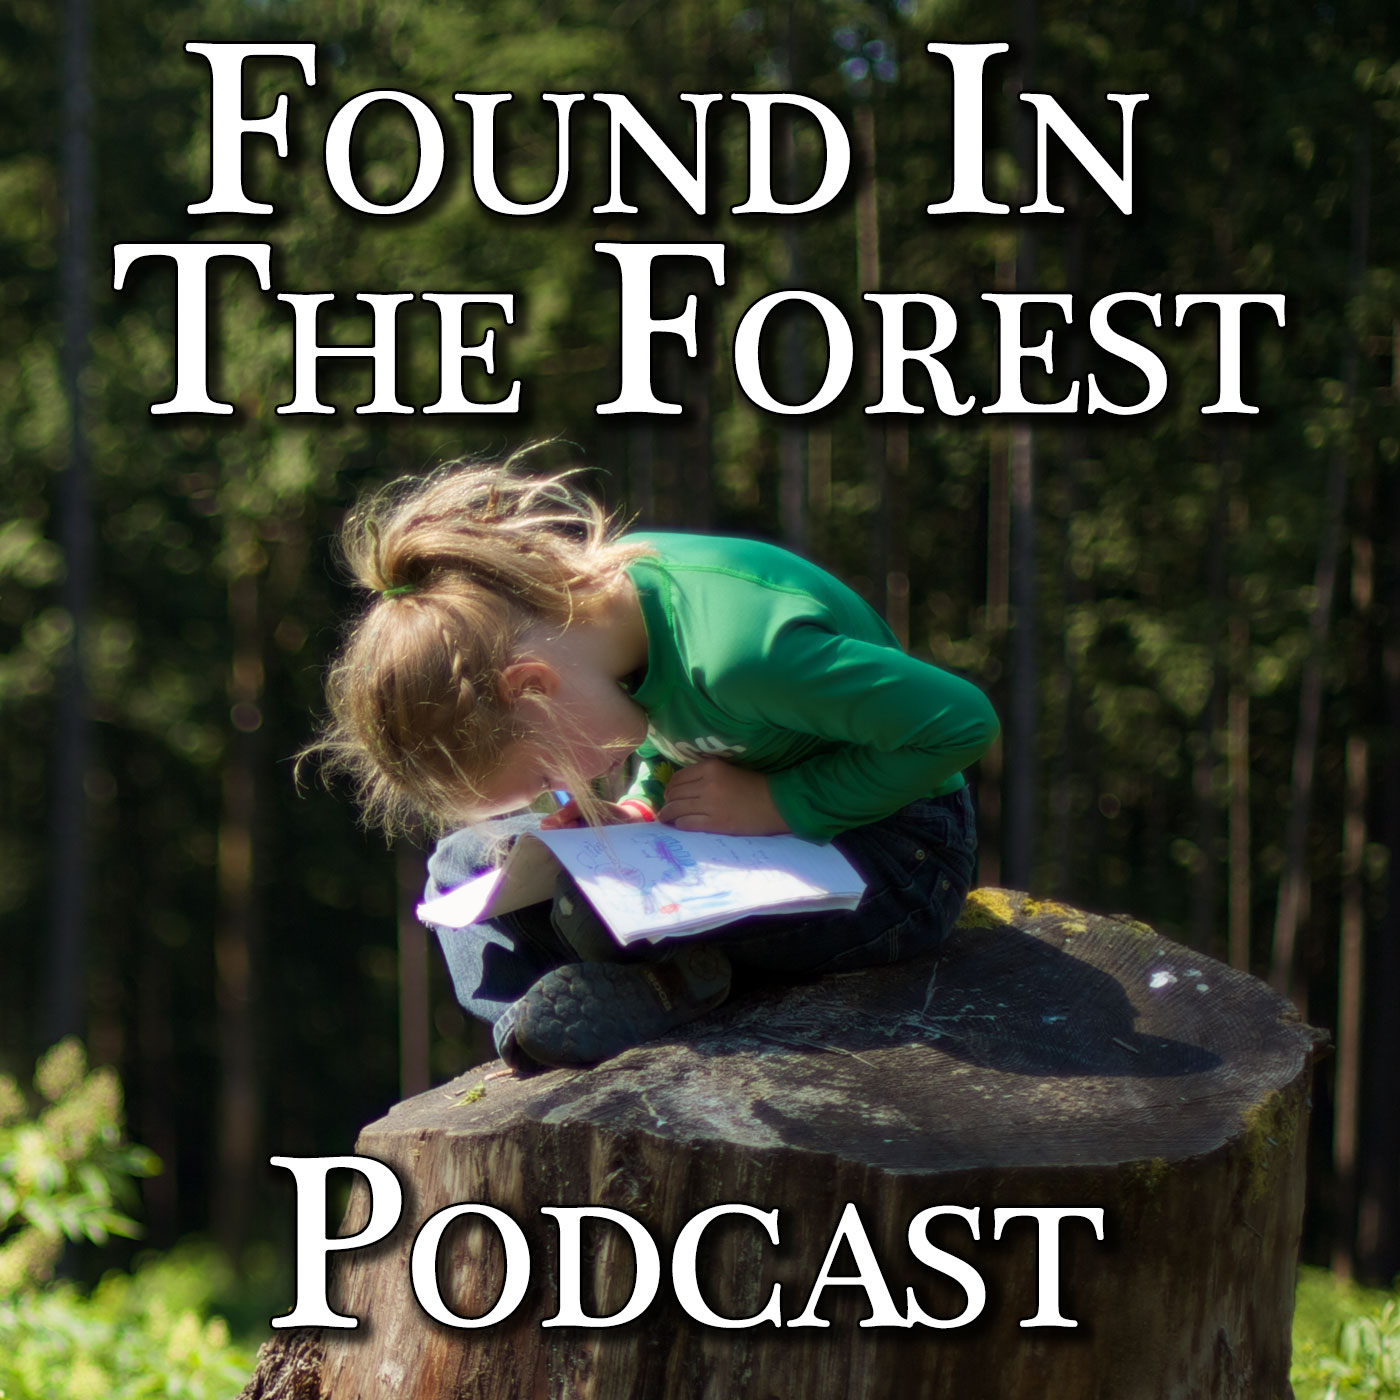 Found In The Forest Podcast